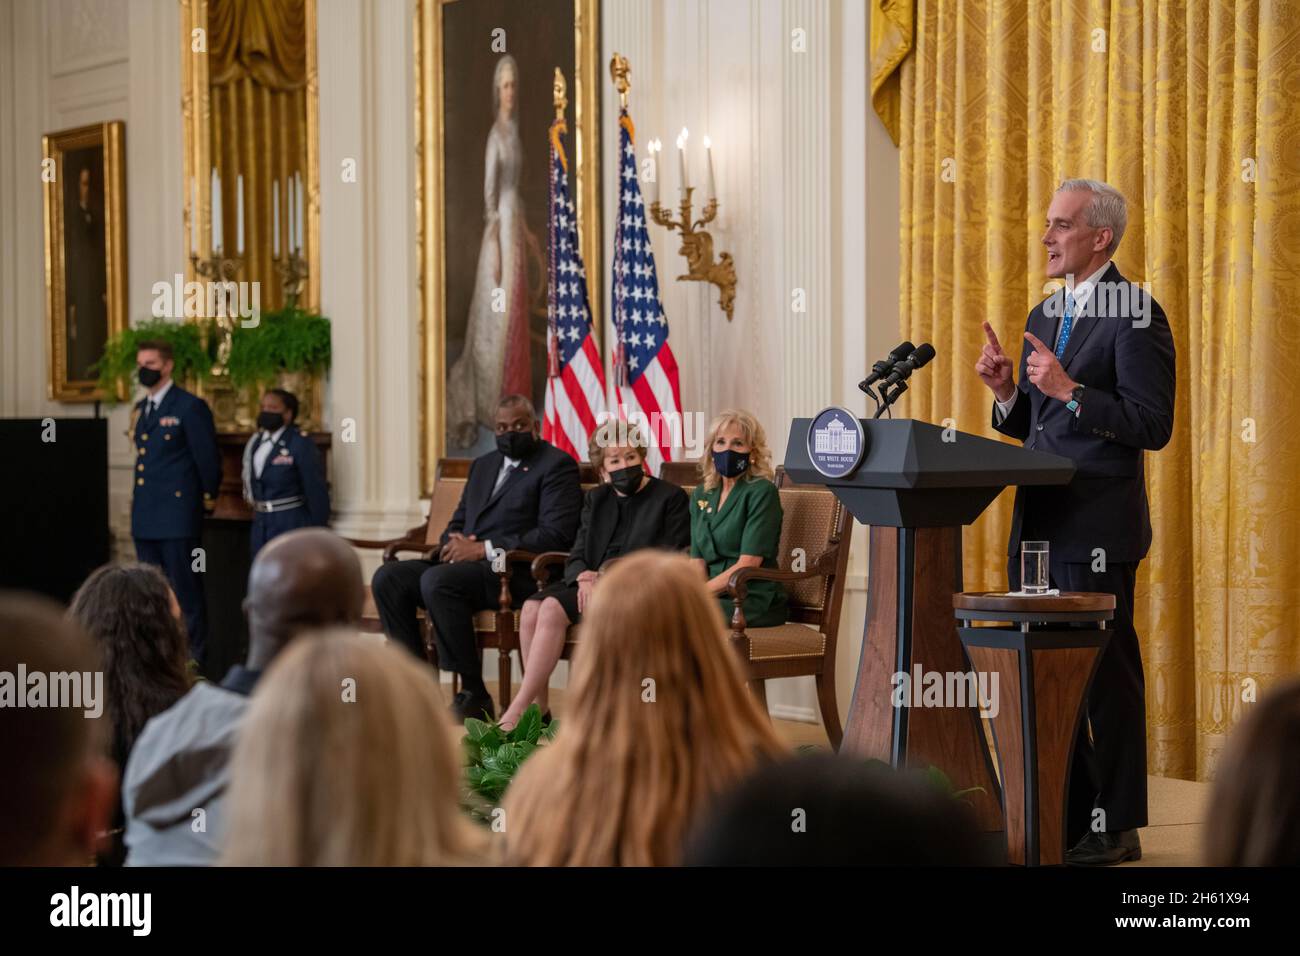 Washington, United States of America. 10 November, 2021. Secretary of Veterans Affairs Denis McDonough speaks at an event honoring children caregivers of veteran and military families hosted by First Lady Jill Biden in the East Room of the White House November 10, 2021 in Washington, D.C. Credit: SSgt. Jack Sanders/DOD photo/Alamy Live News Stock Photo